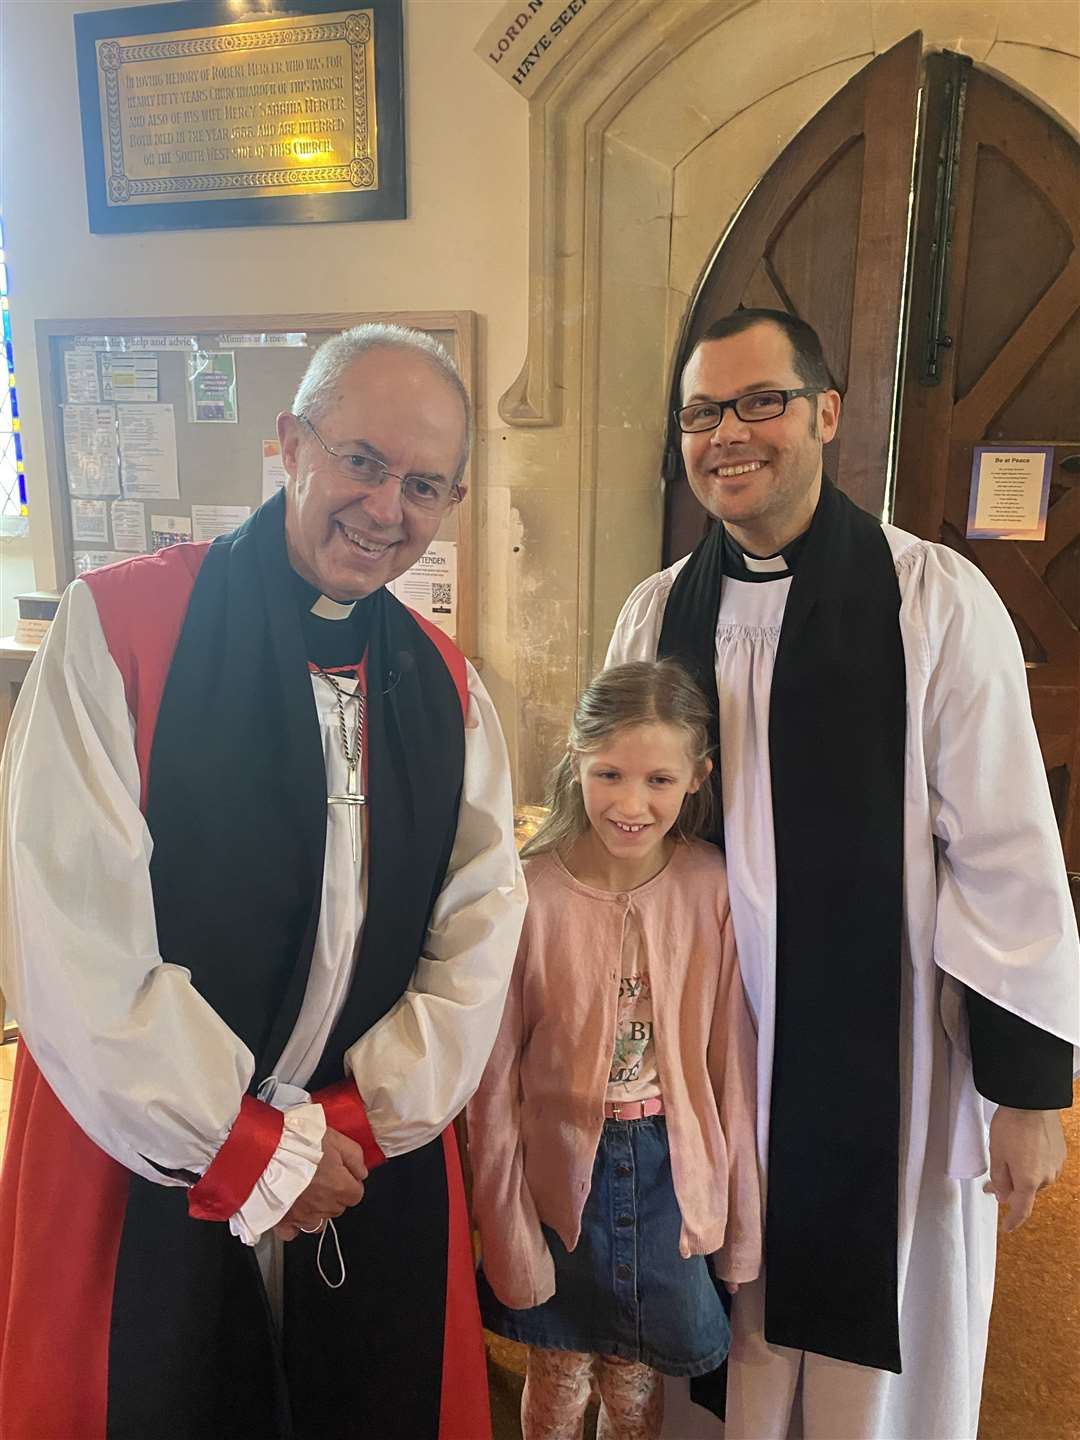 The Archbishop with Rev Pete and his daughter Phoebe. Picture: Rev Peter Deaves